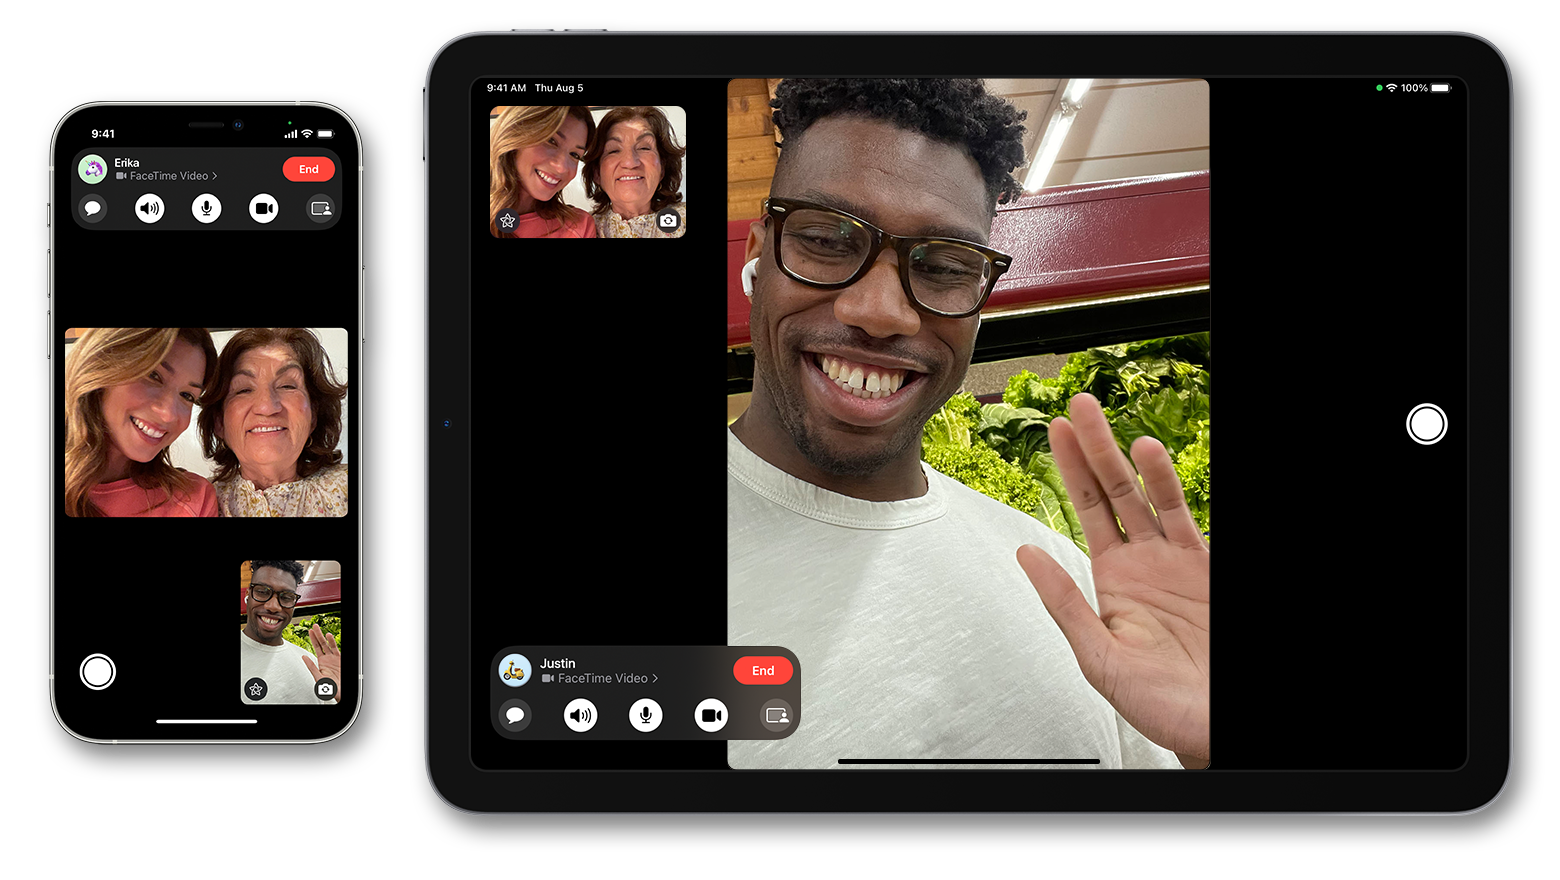 An iPhone next to an iPad. Both devices show ongoing FaceTime video calls.